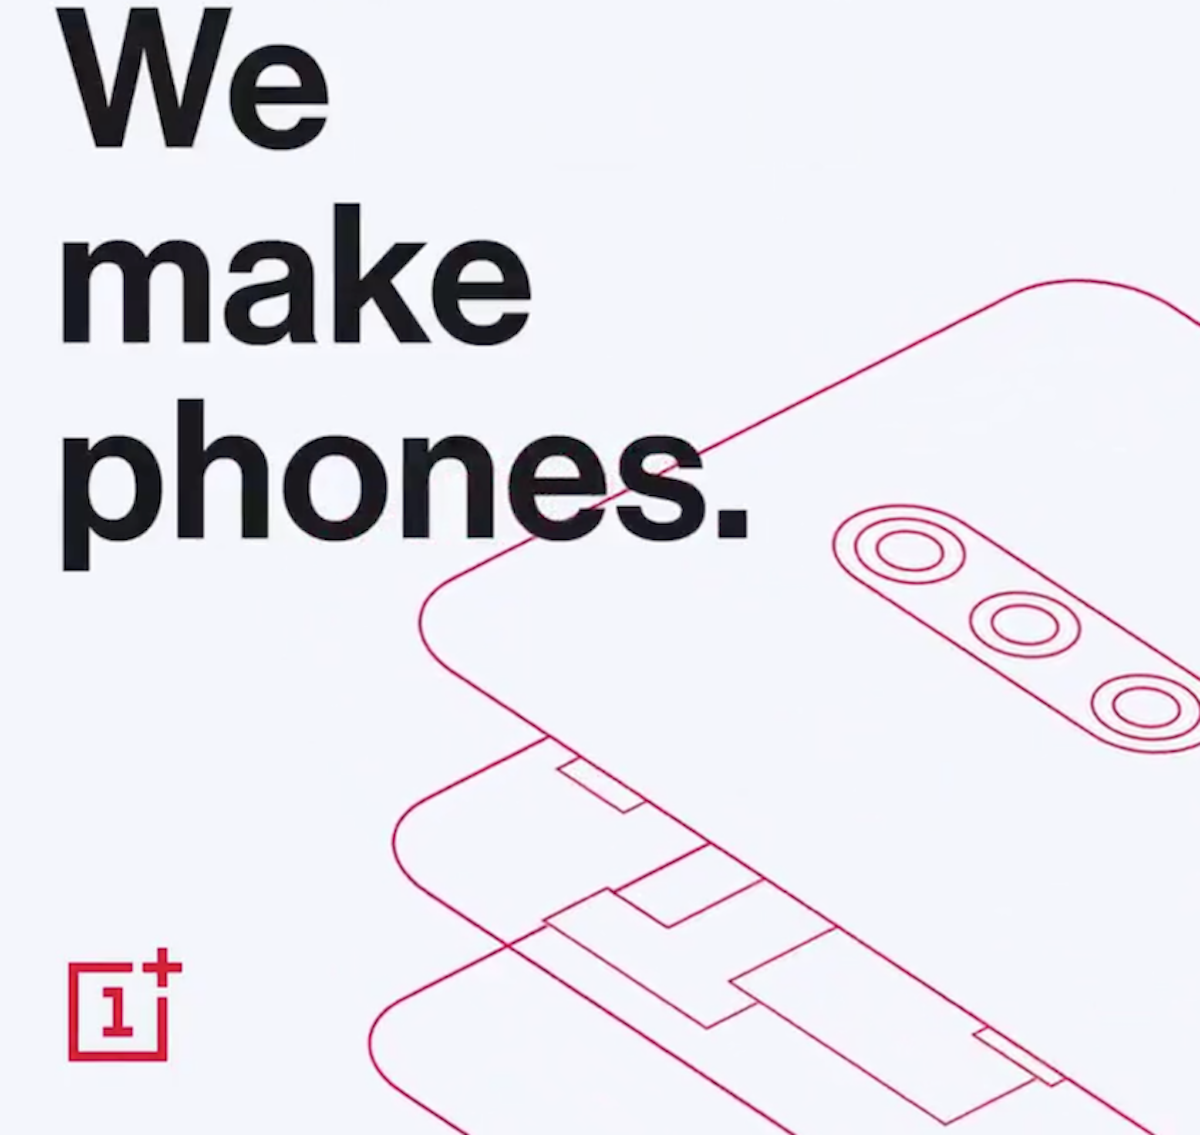 What kind of cameras will the OnePlus 7 have?